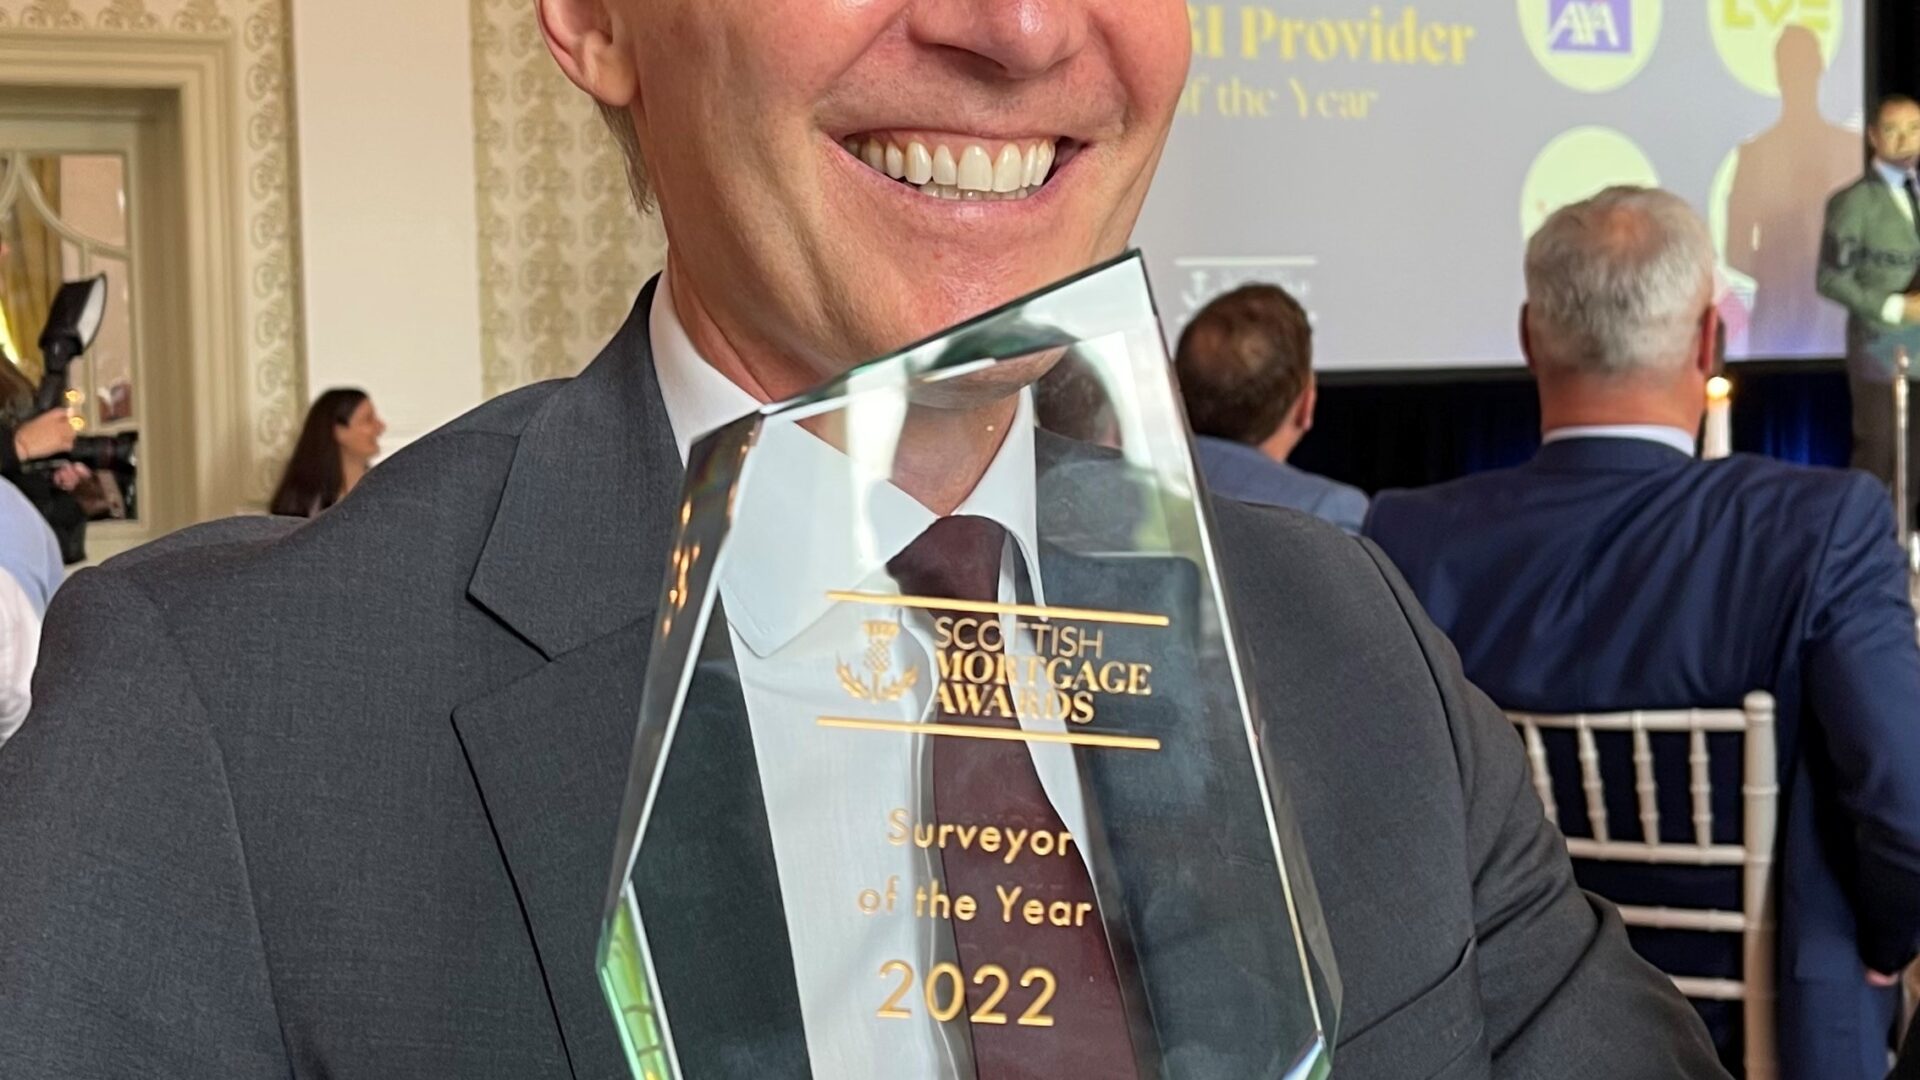 Shepherd wins Surveyor of the Year for unprecedented fourth year in a row